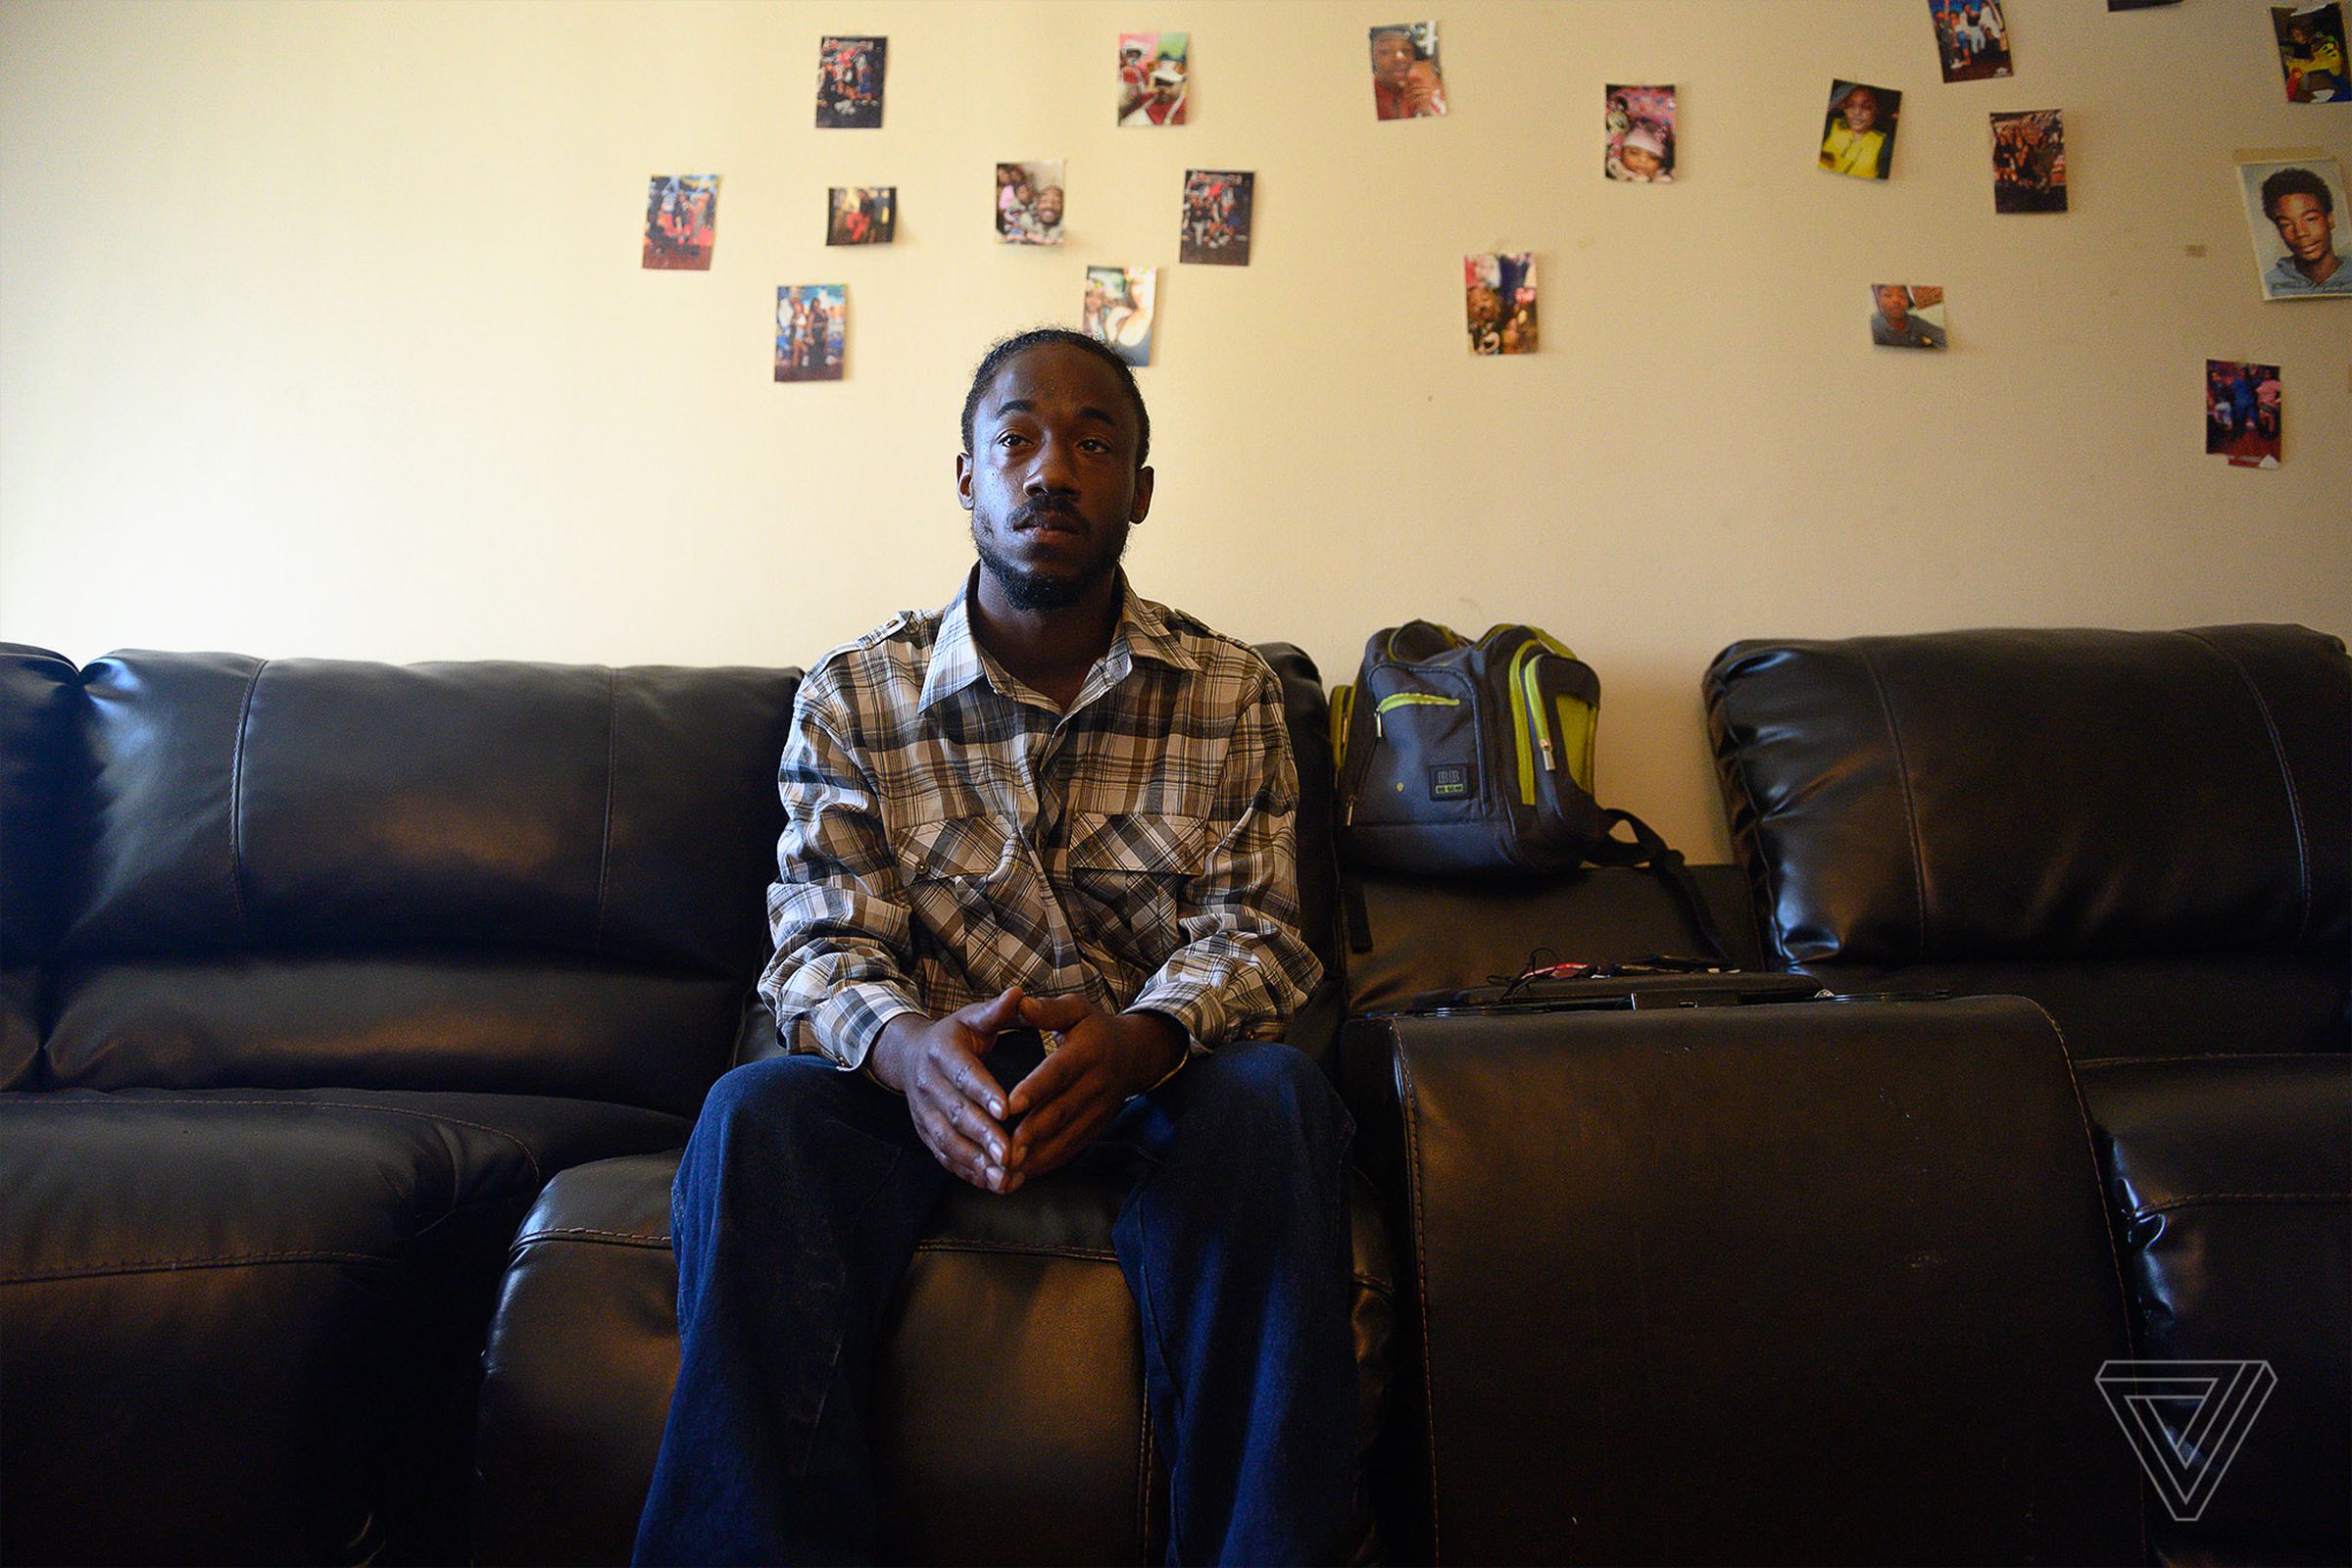 26-year-old Jovan Cleveland photographed at his sister Rece’s apartment.